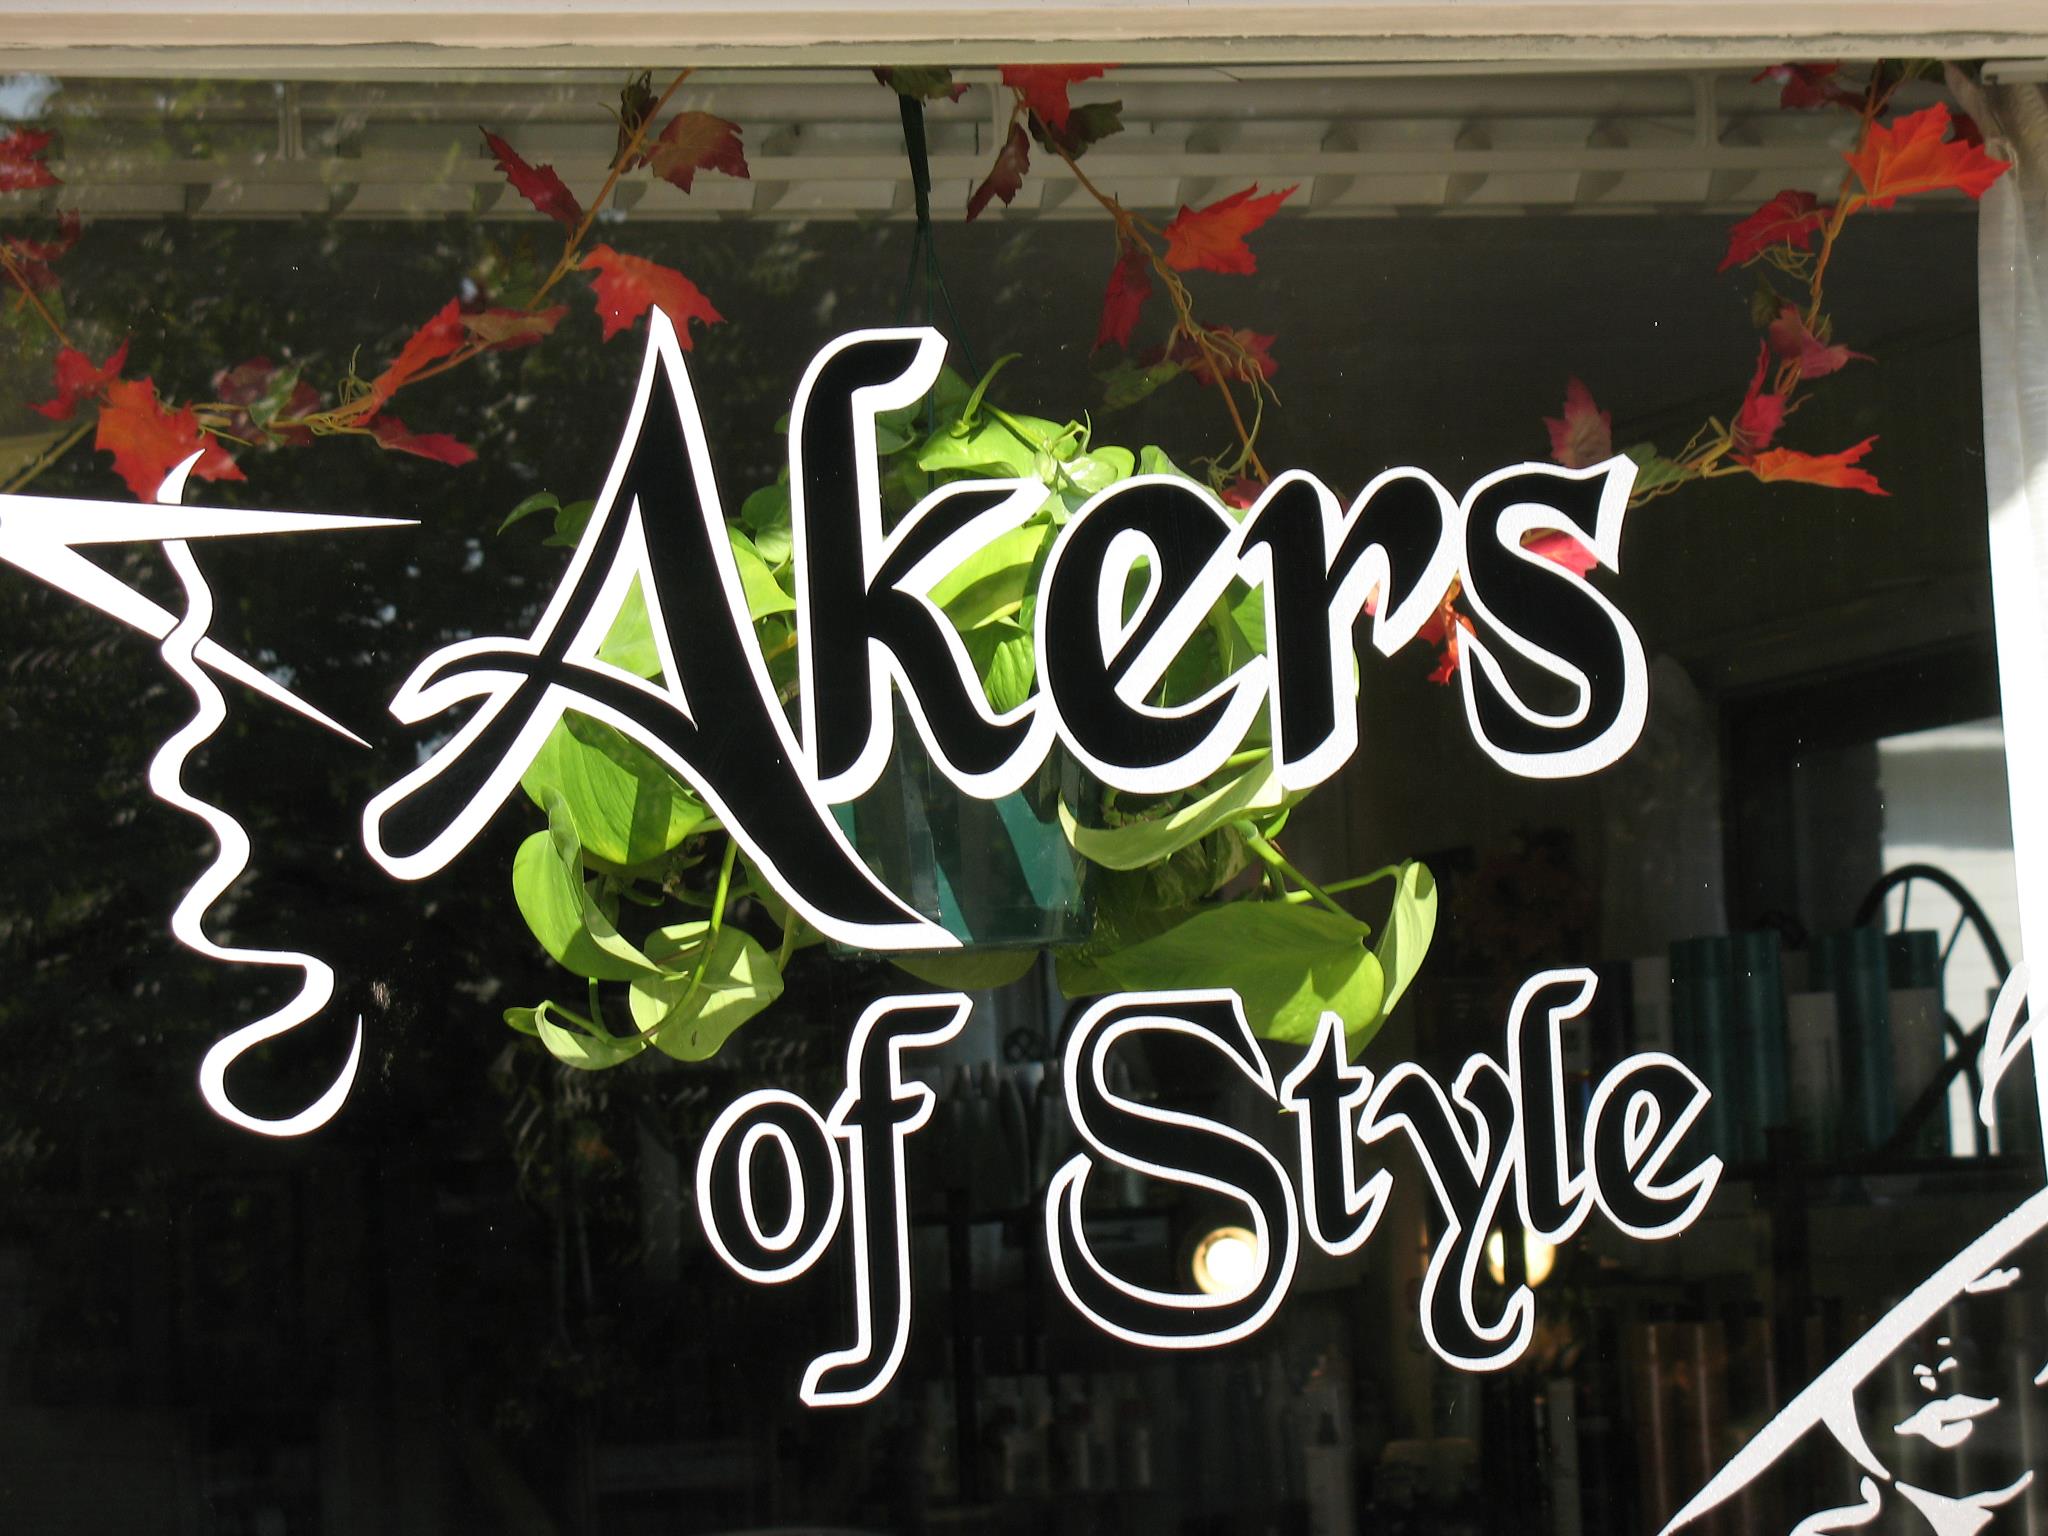 Akers of Style 125 Plainfield Rd, West Lafayette Ohio 43845